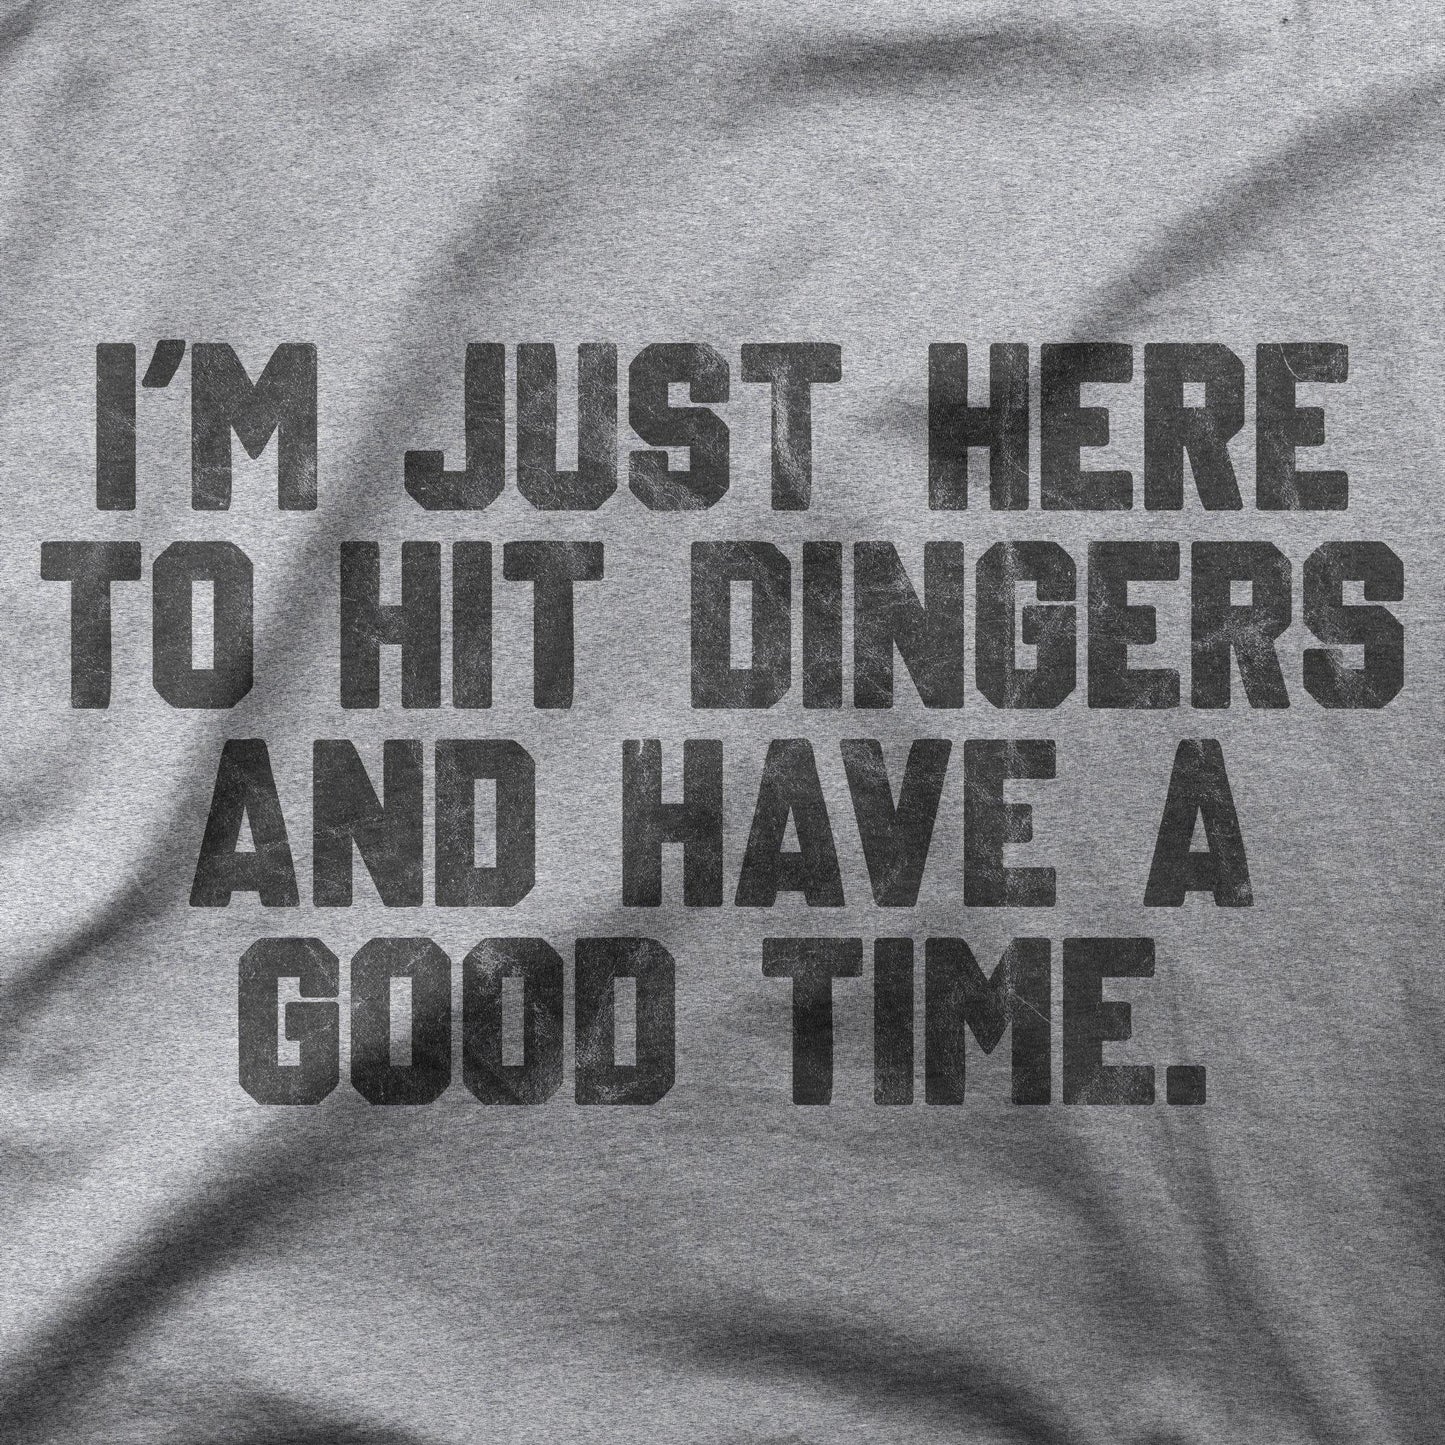 I'm Just Here To Hit Dingers | T-Shirt - Jomboy Media